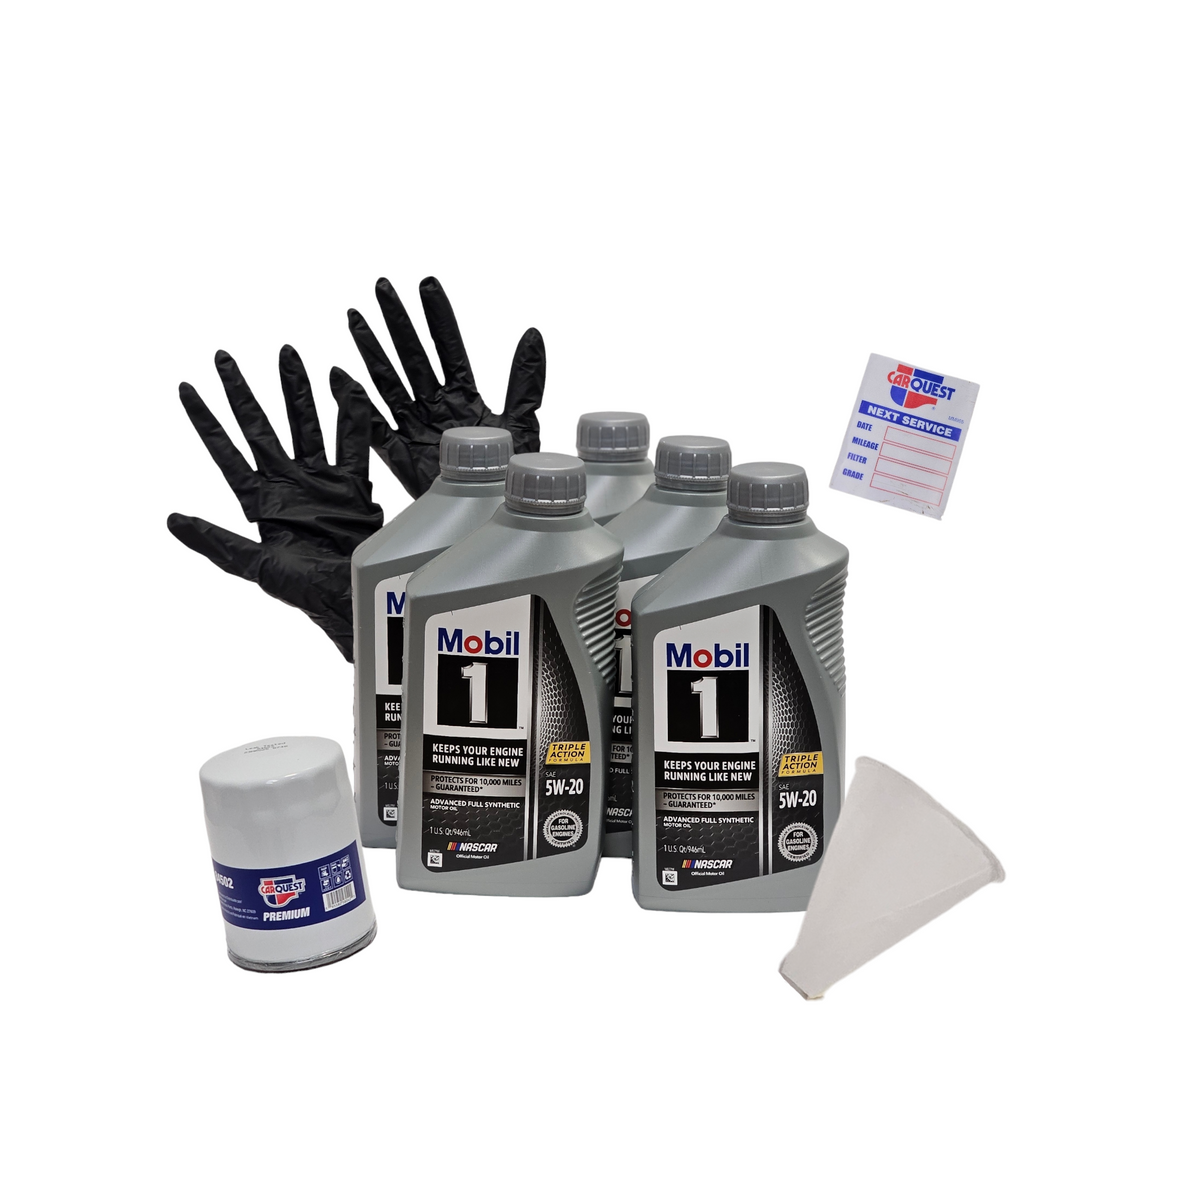 Oil Change Bundle for your car including premium synthetic oil, premium oil filter, funnel, nitrile gloves, and a window sticker.